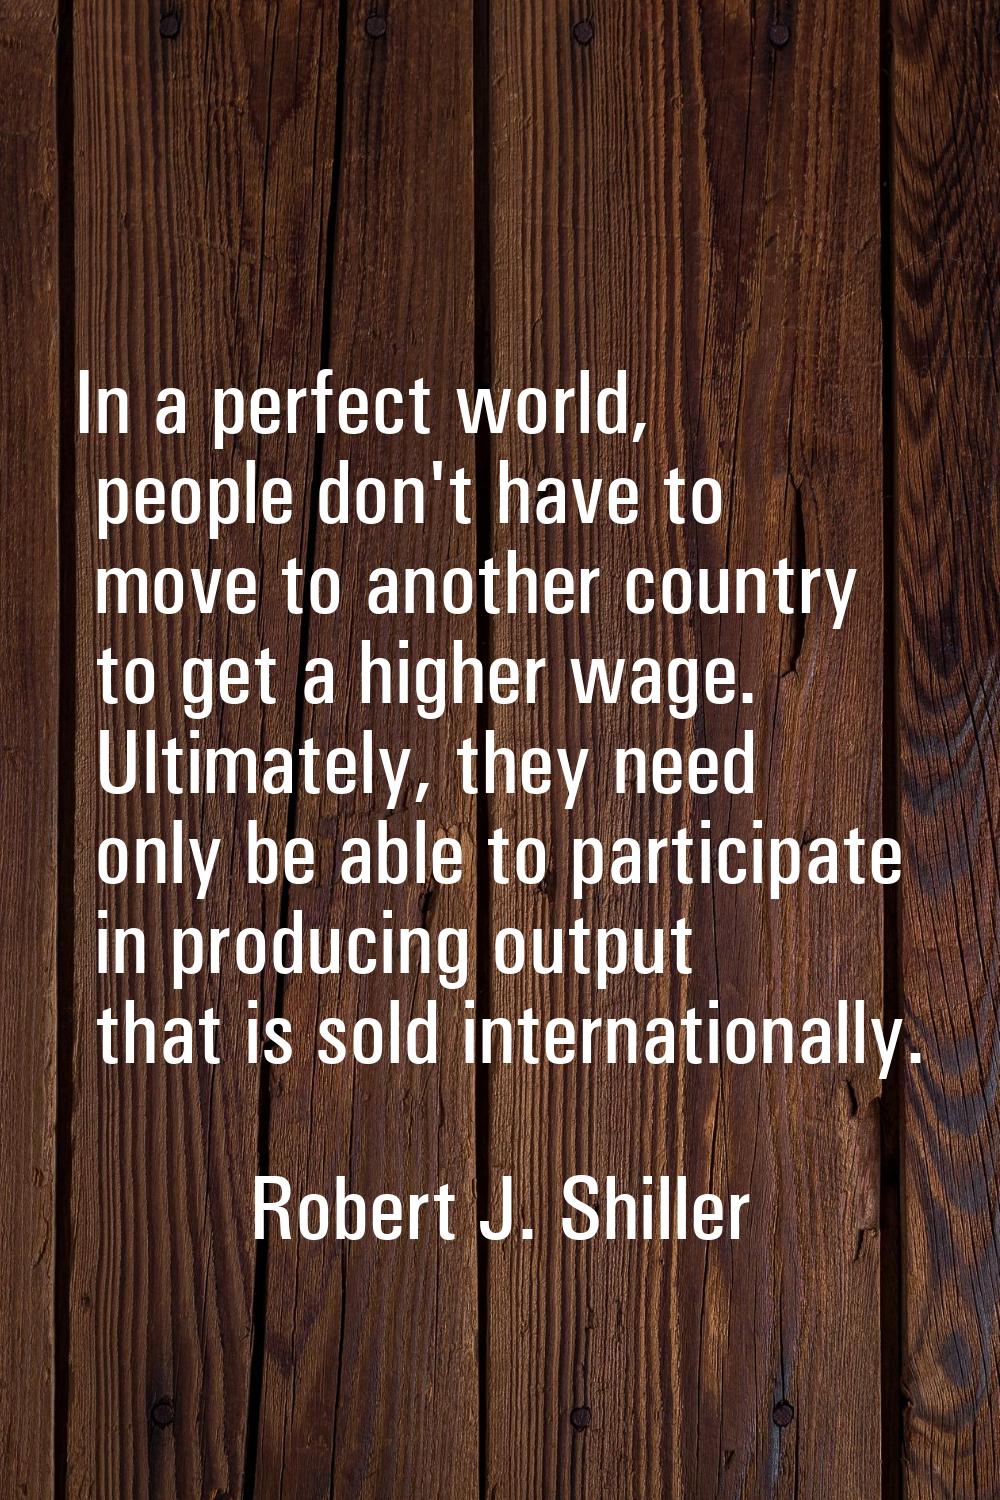 In a perfect world, people don't have to move to another country to get a higher wage. Ultimately, 